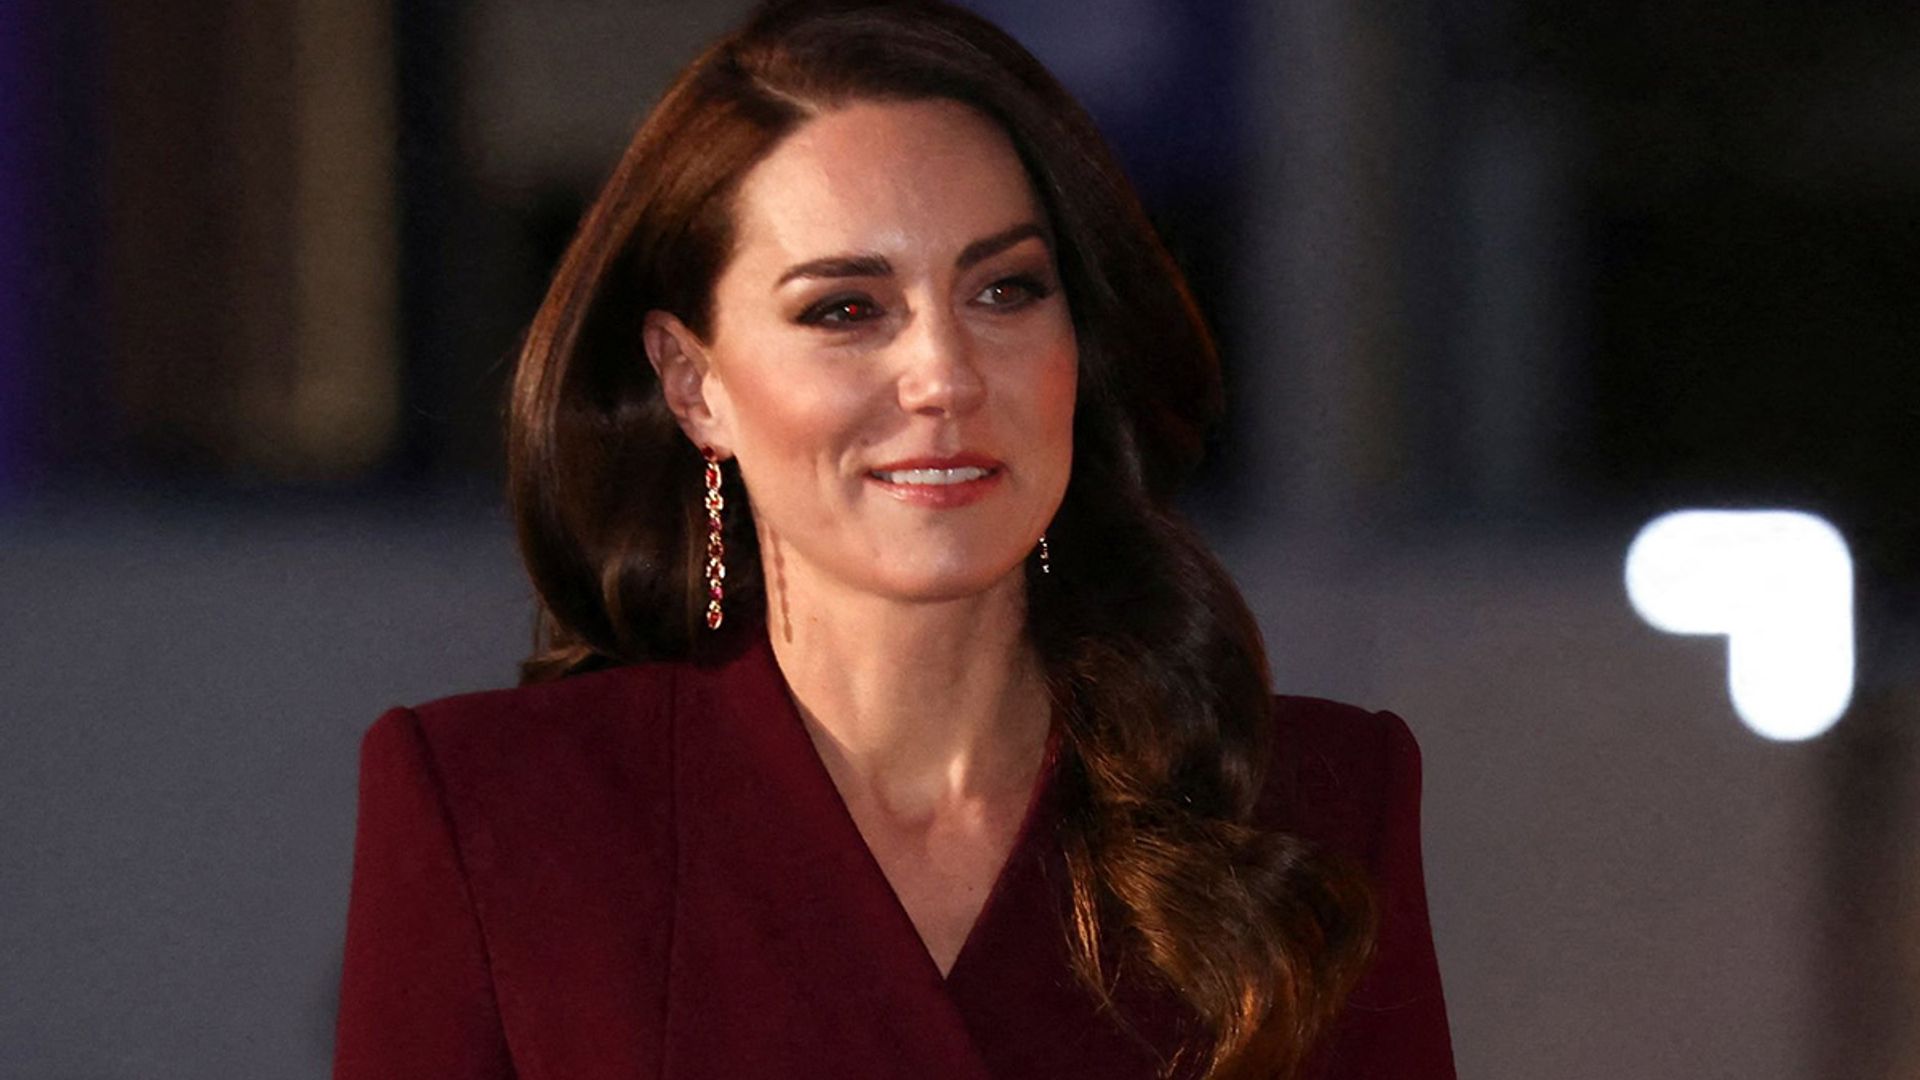 Princess Kate pictured looking sombre after royal family death and Prince Harry bombshells thumbnail